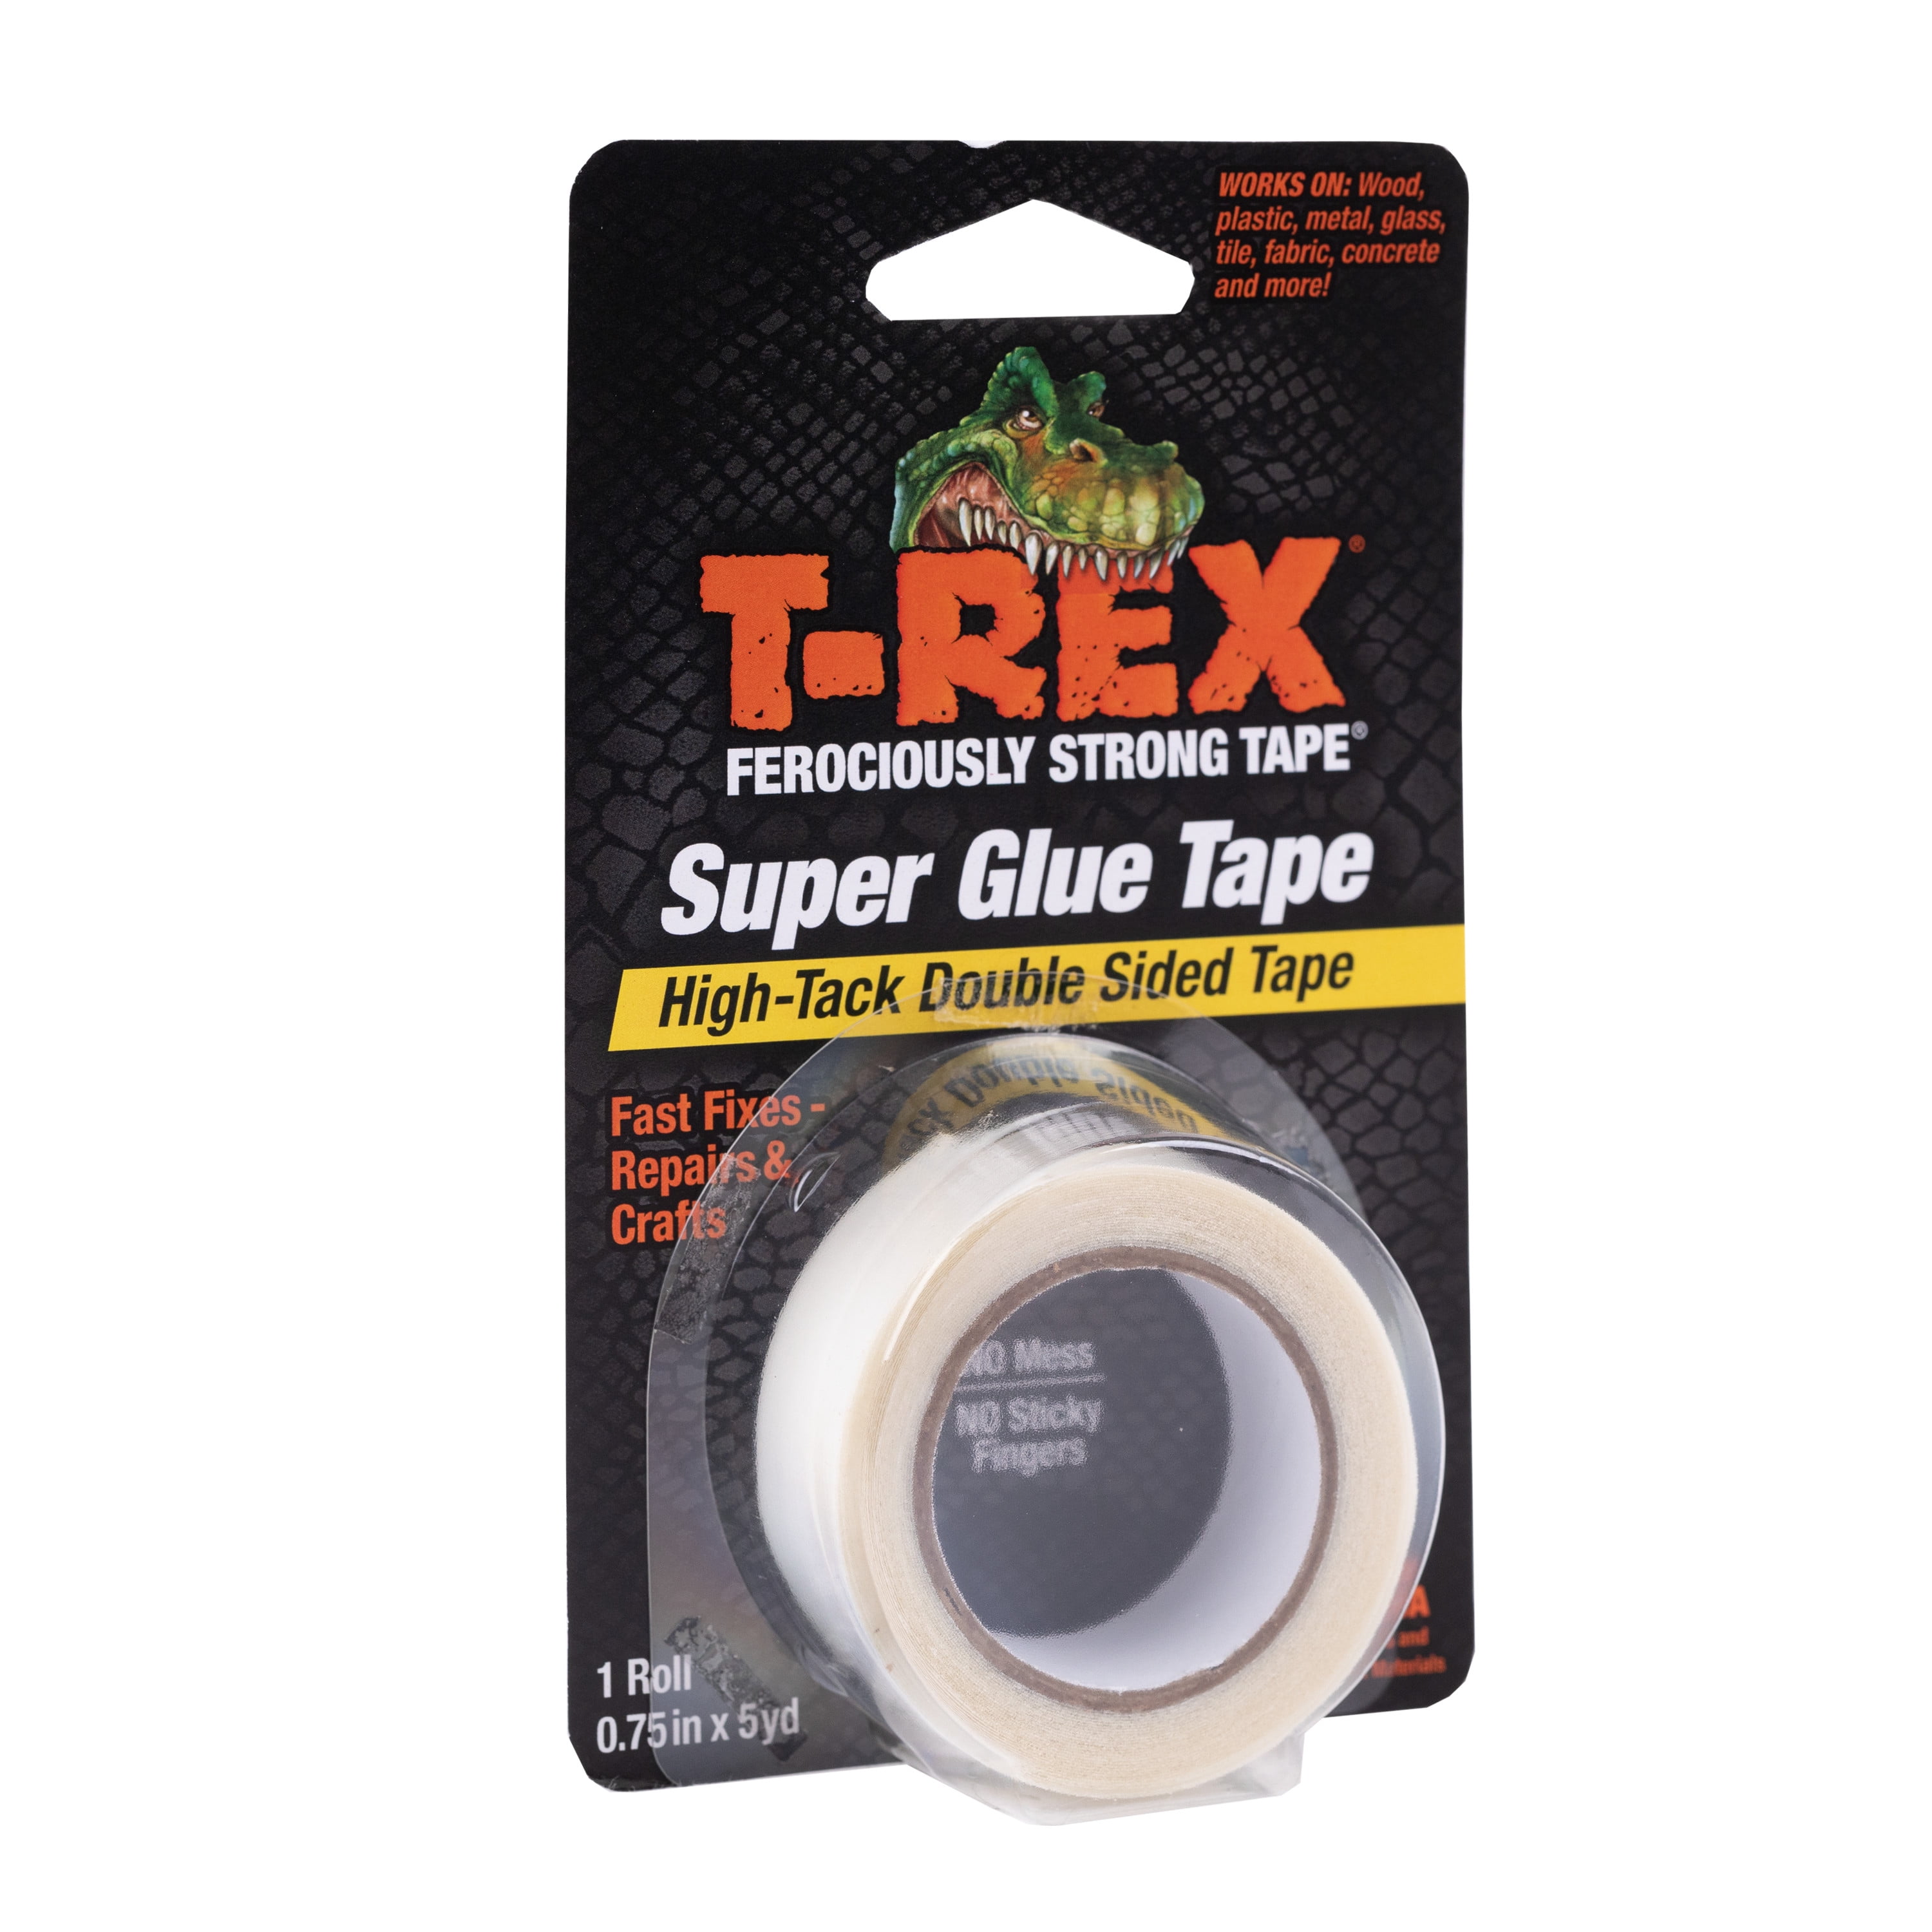 T-Rex Double Sided Super Glue Tape - Clear, 0.75 in. x 5 yd. 